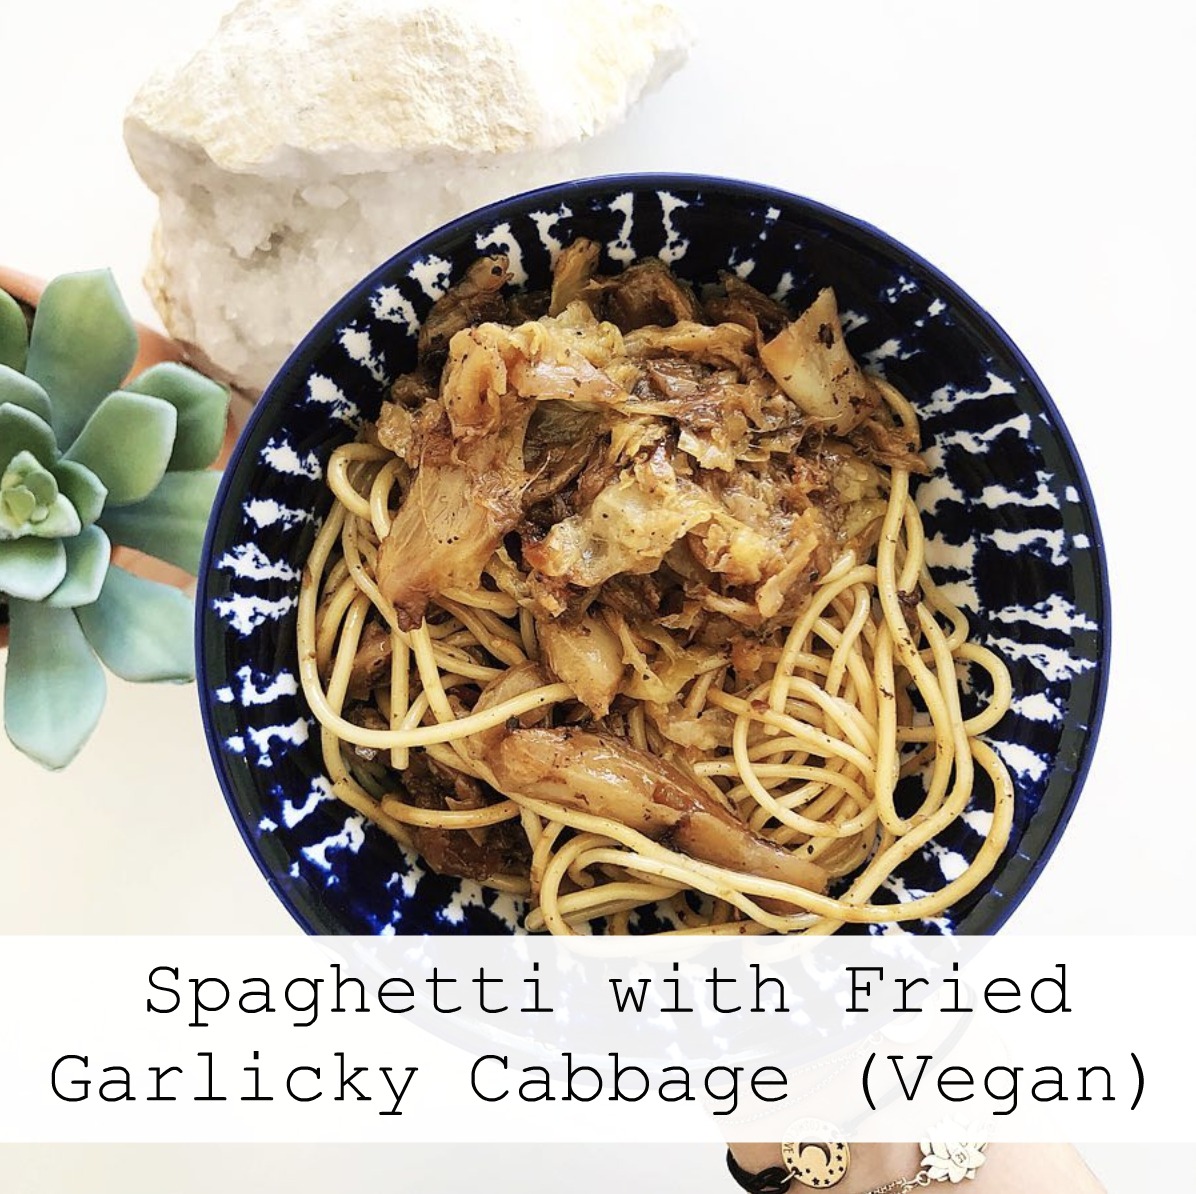 Spaghetti with Fried Garlicky Cabbage